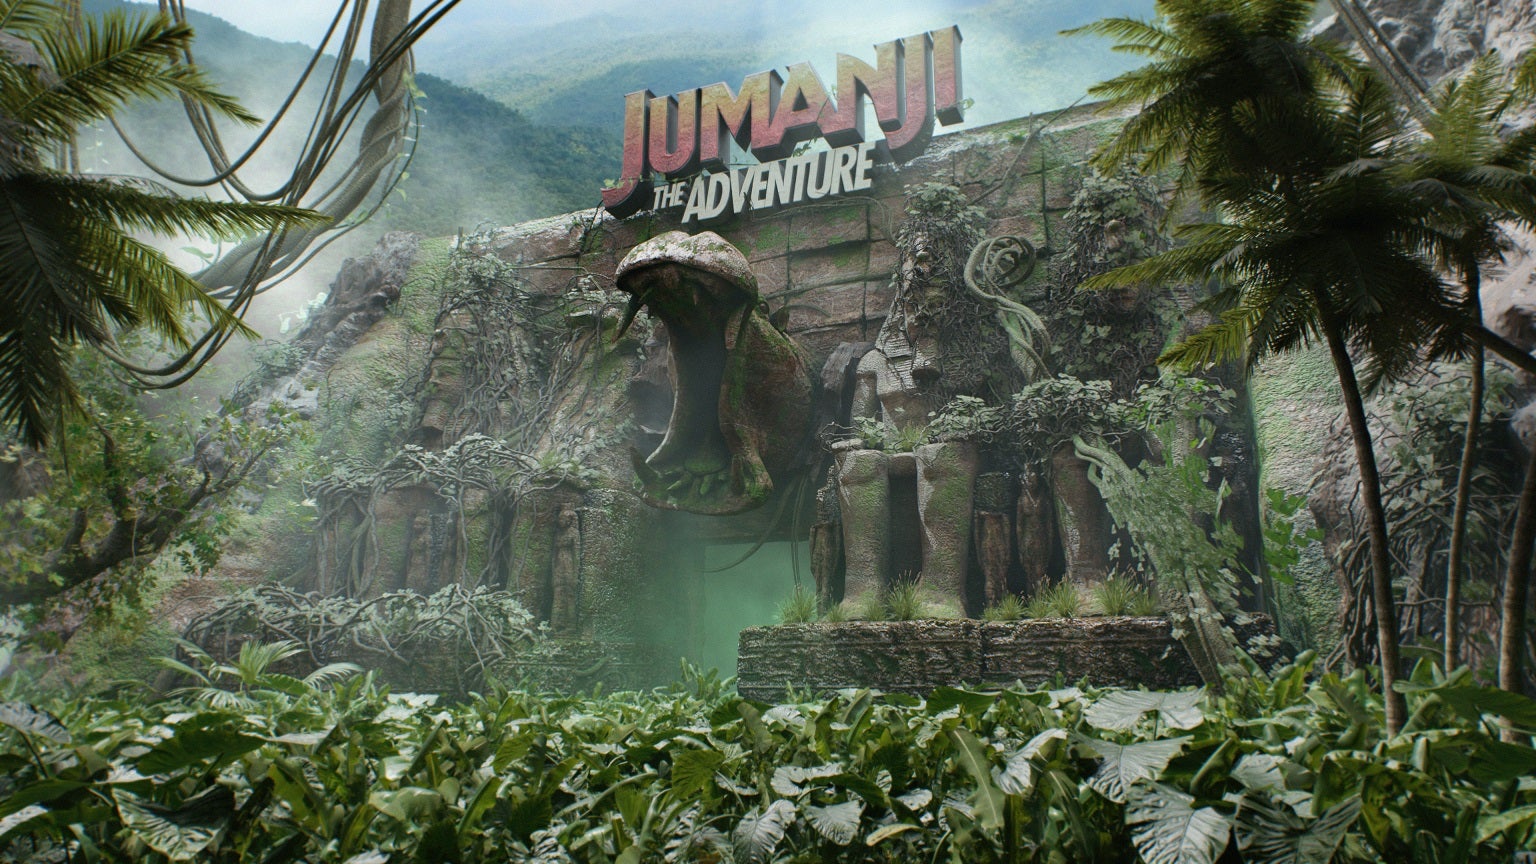 Jumanji: The Adventure, the world's first Jumanji ride, opens next month in Italy. (Image: Merlin)